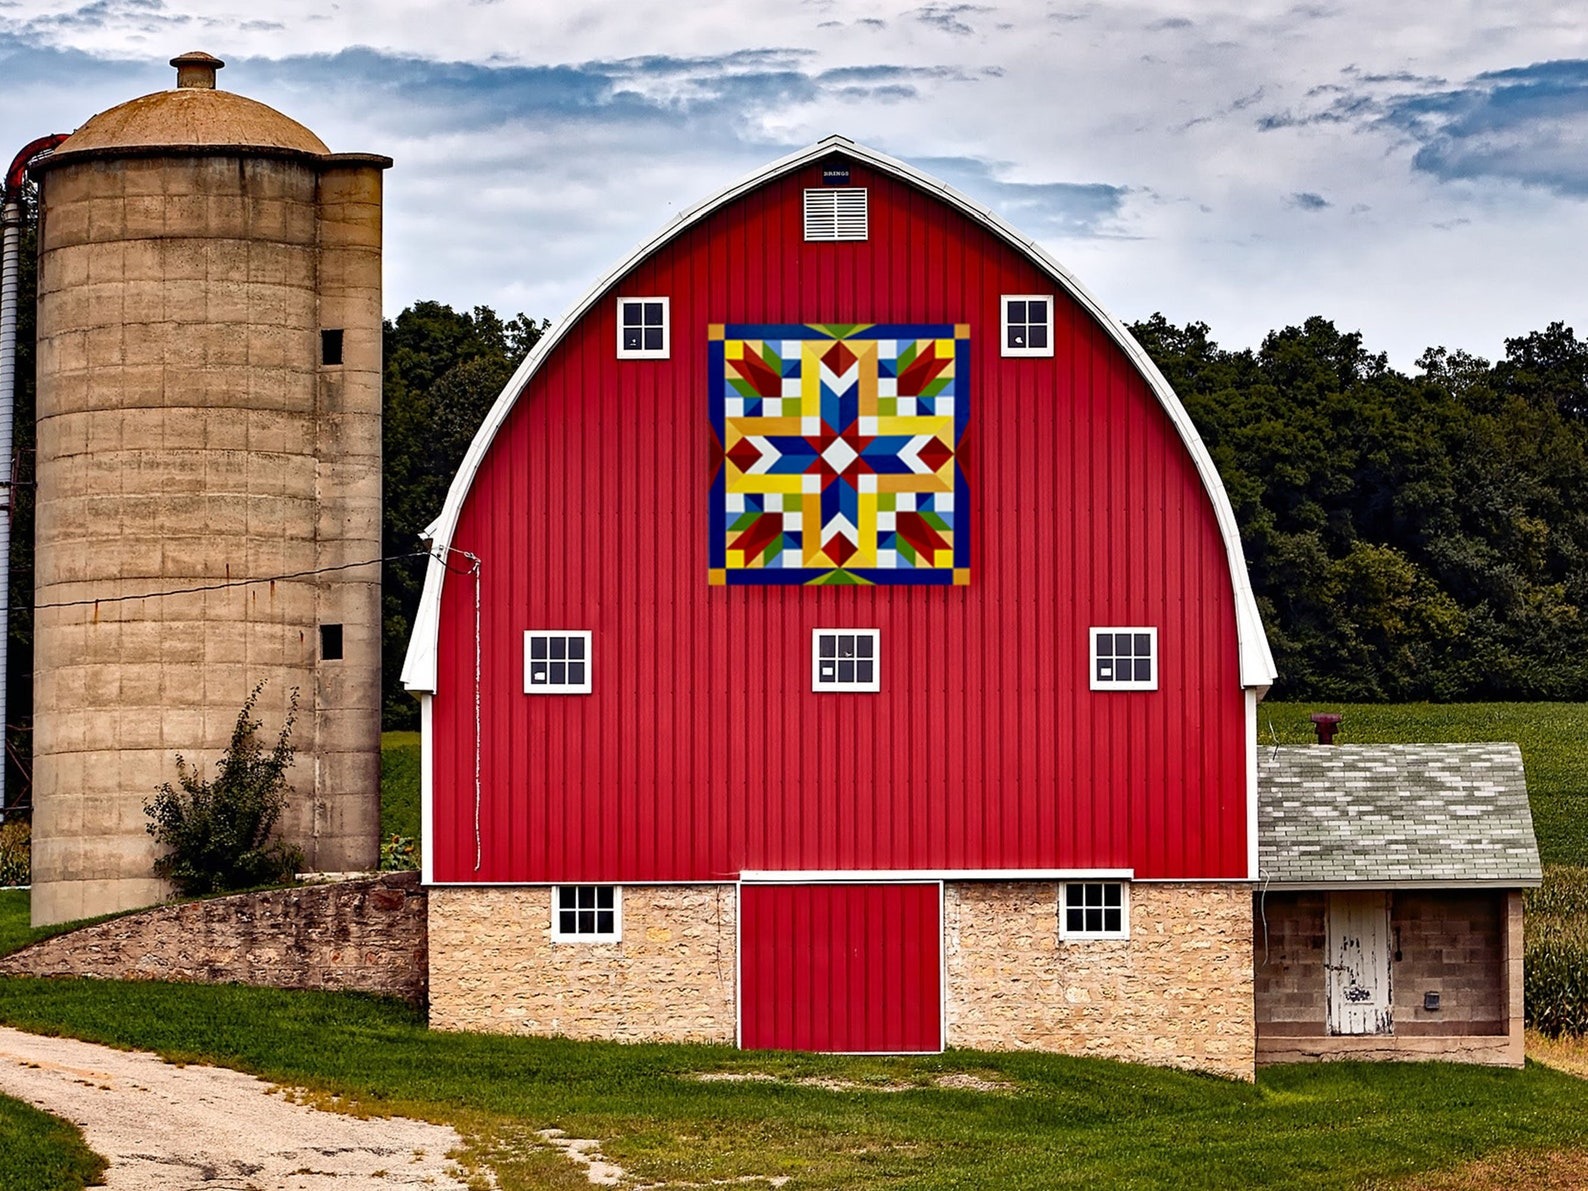 a spring rising barn quilt hanging on the barn